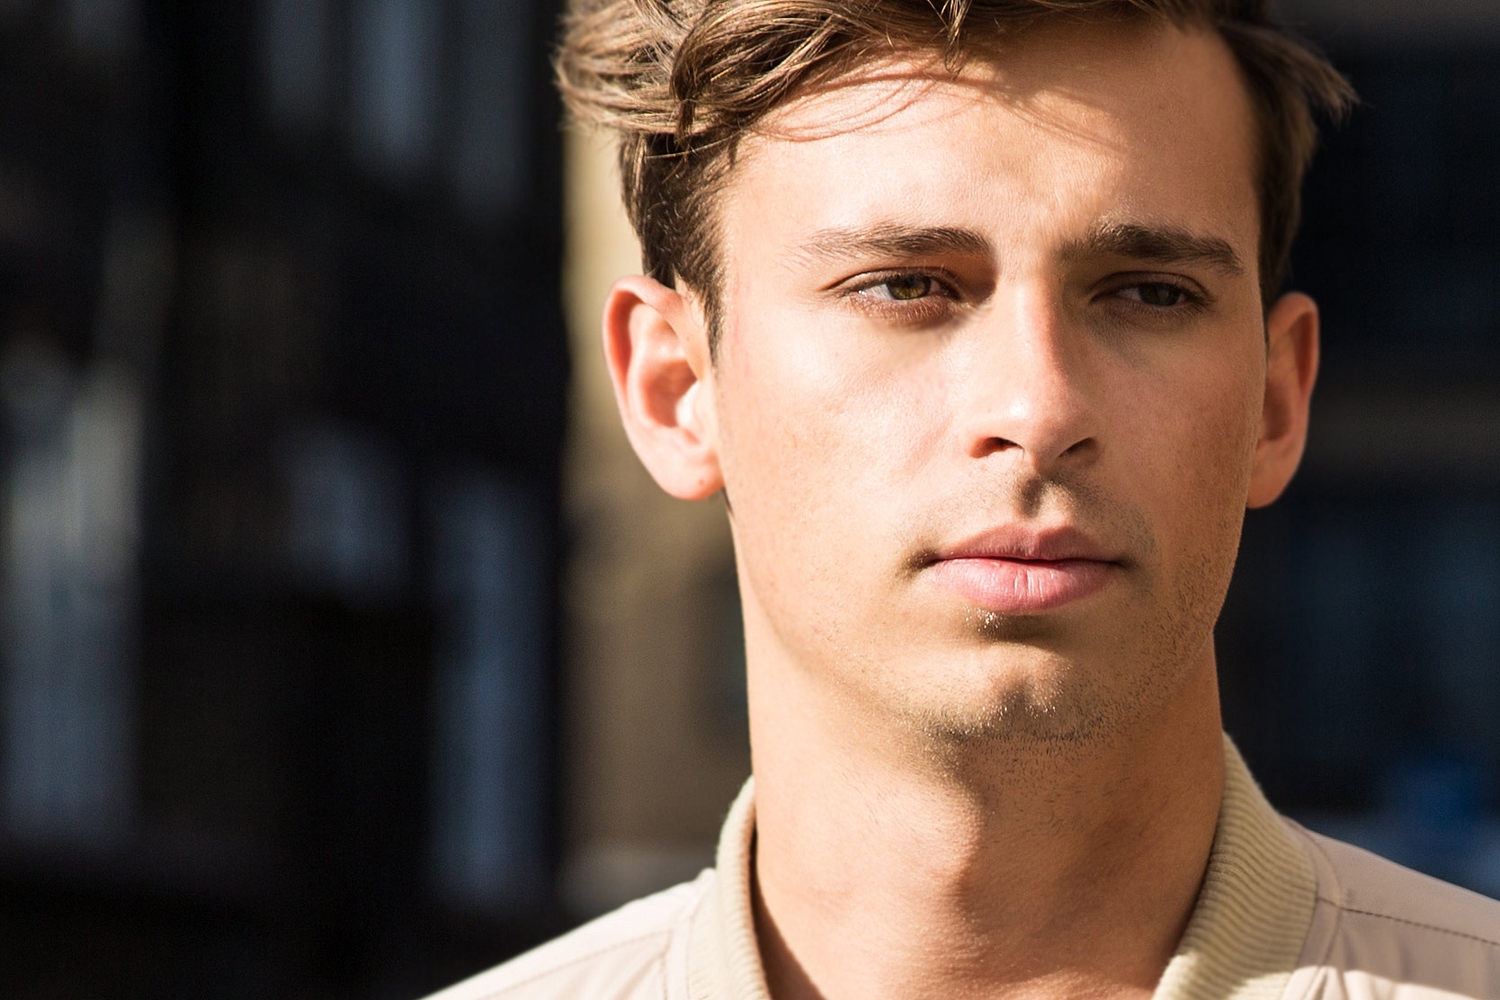 Flume shares new mixtape ‘Hi This Is Flume’ ft SOPHIE, slowthai and more